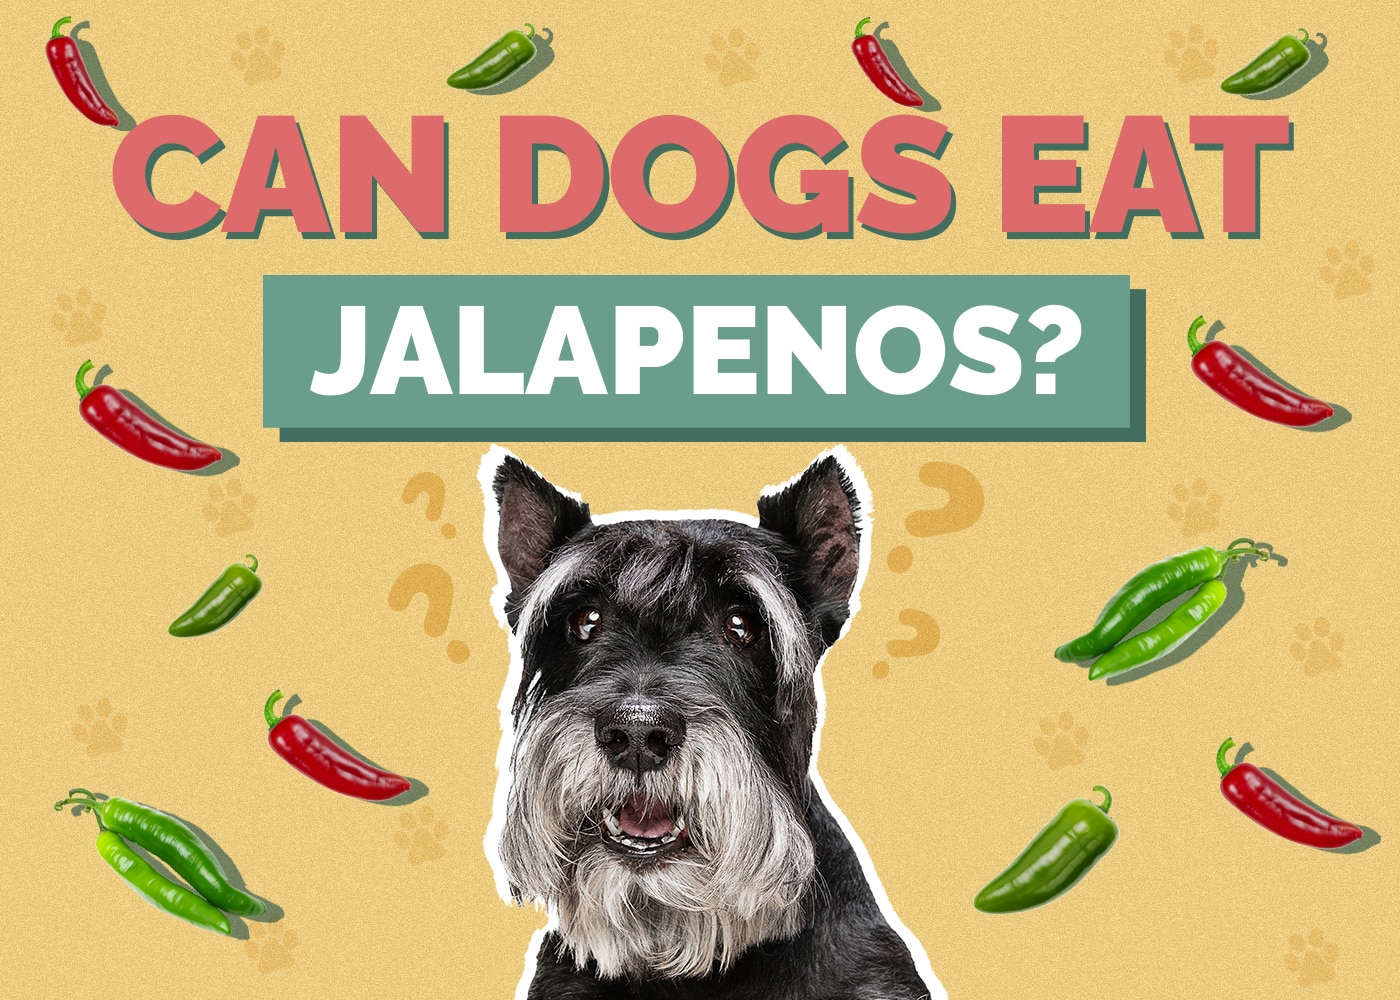 Can Dogs Eat jalapenos